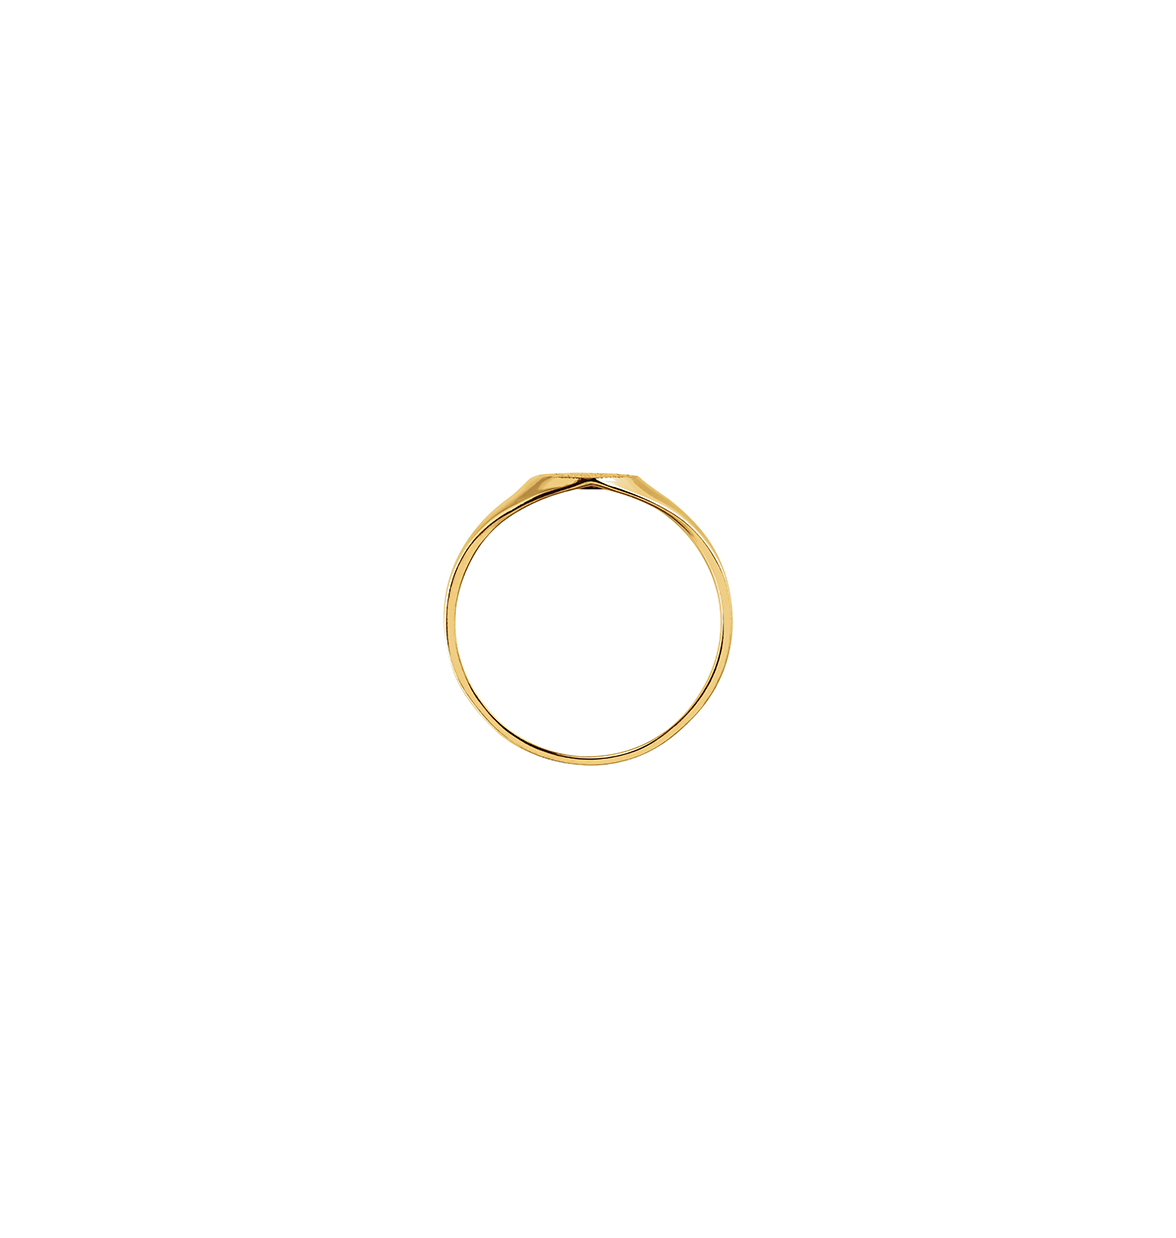 INITIAL HEART SIGNET 14K SOLID GOLD RING